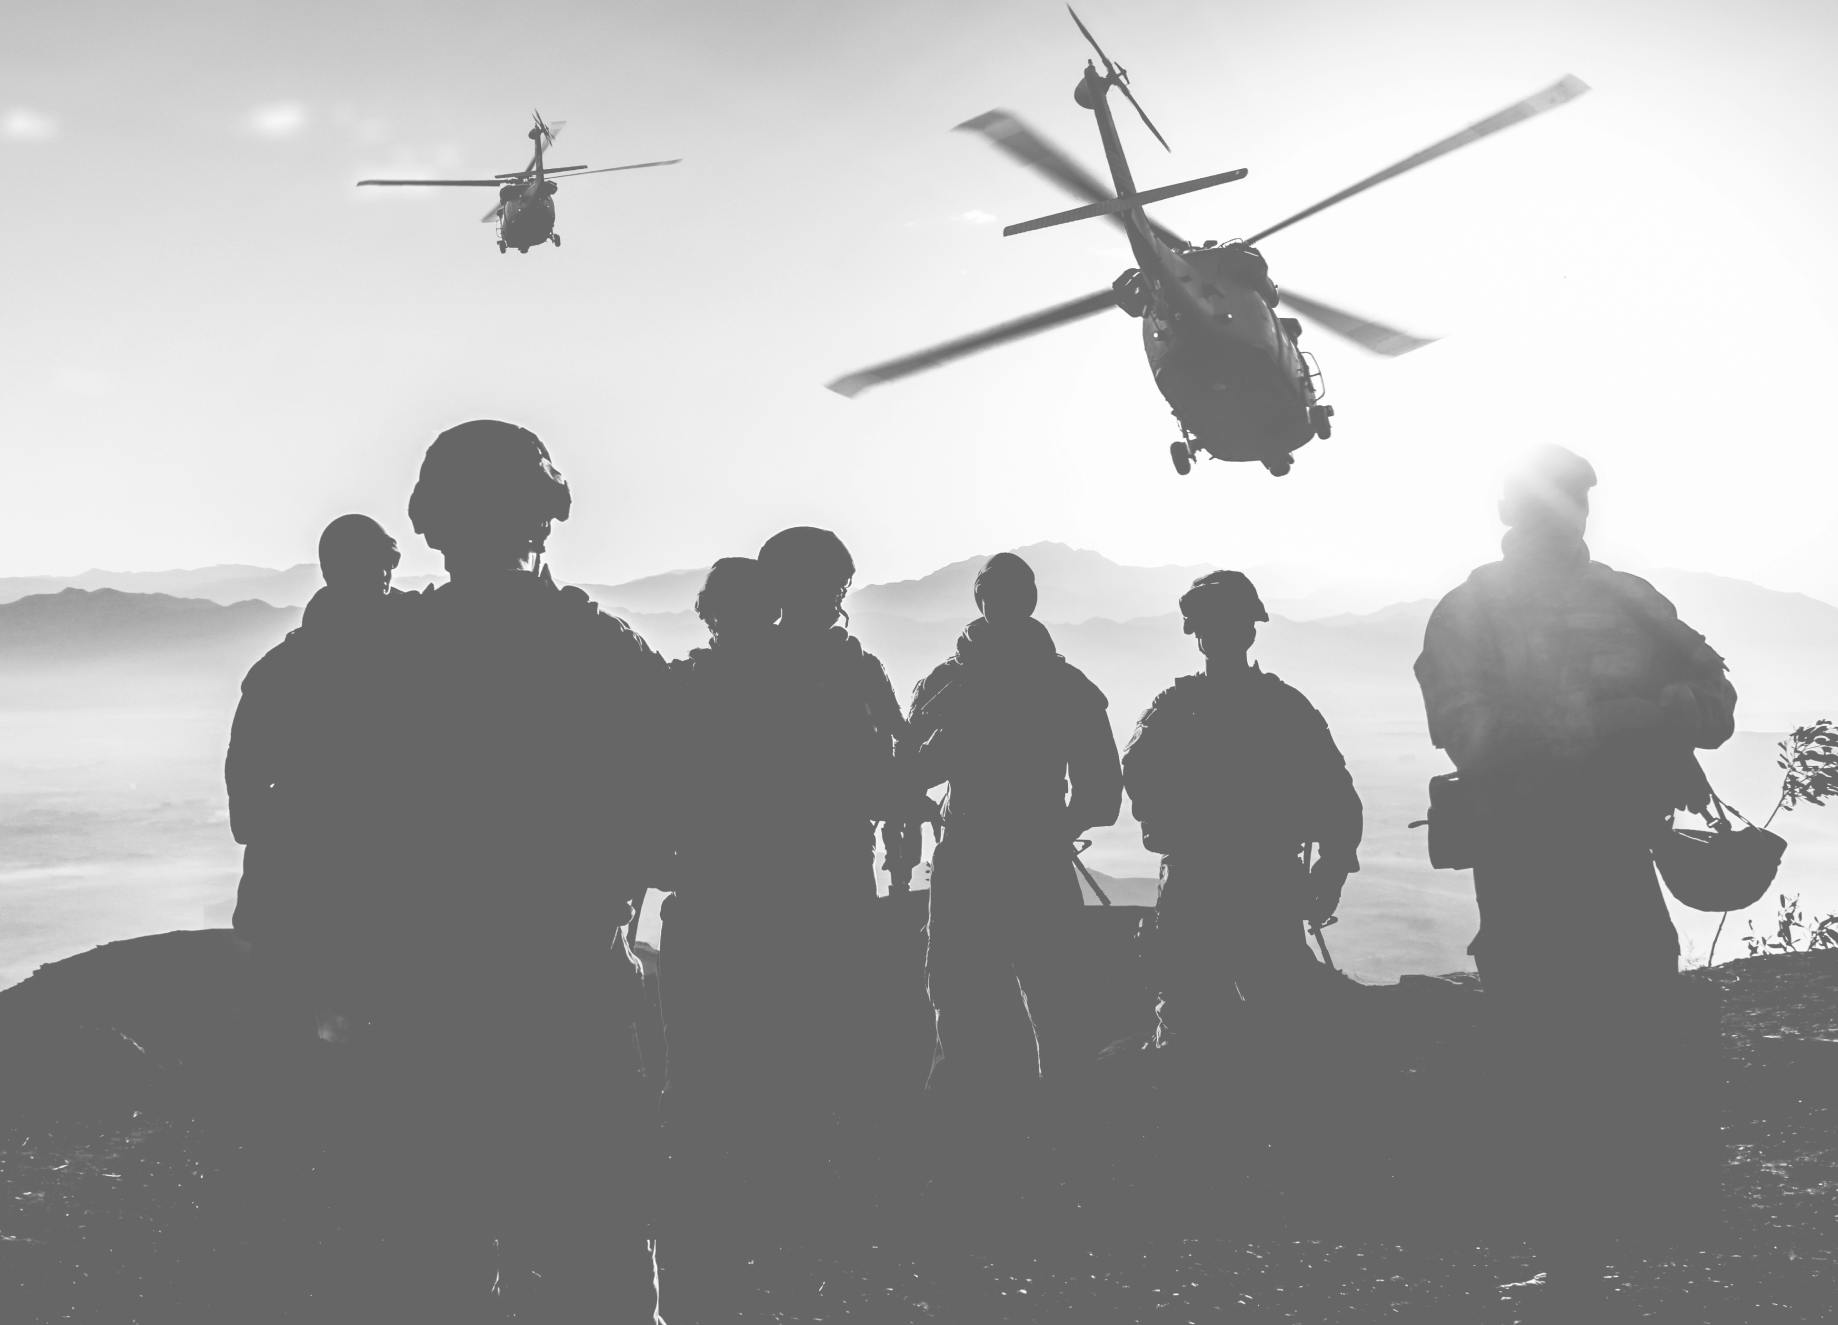 Black and white image showing silhouettes of soldiers on top of a mountain with the sun shining brightly in the background and two helicopters flying towards the soldiers' position. Header image for military operations.